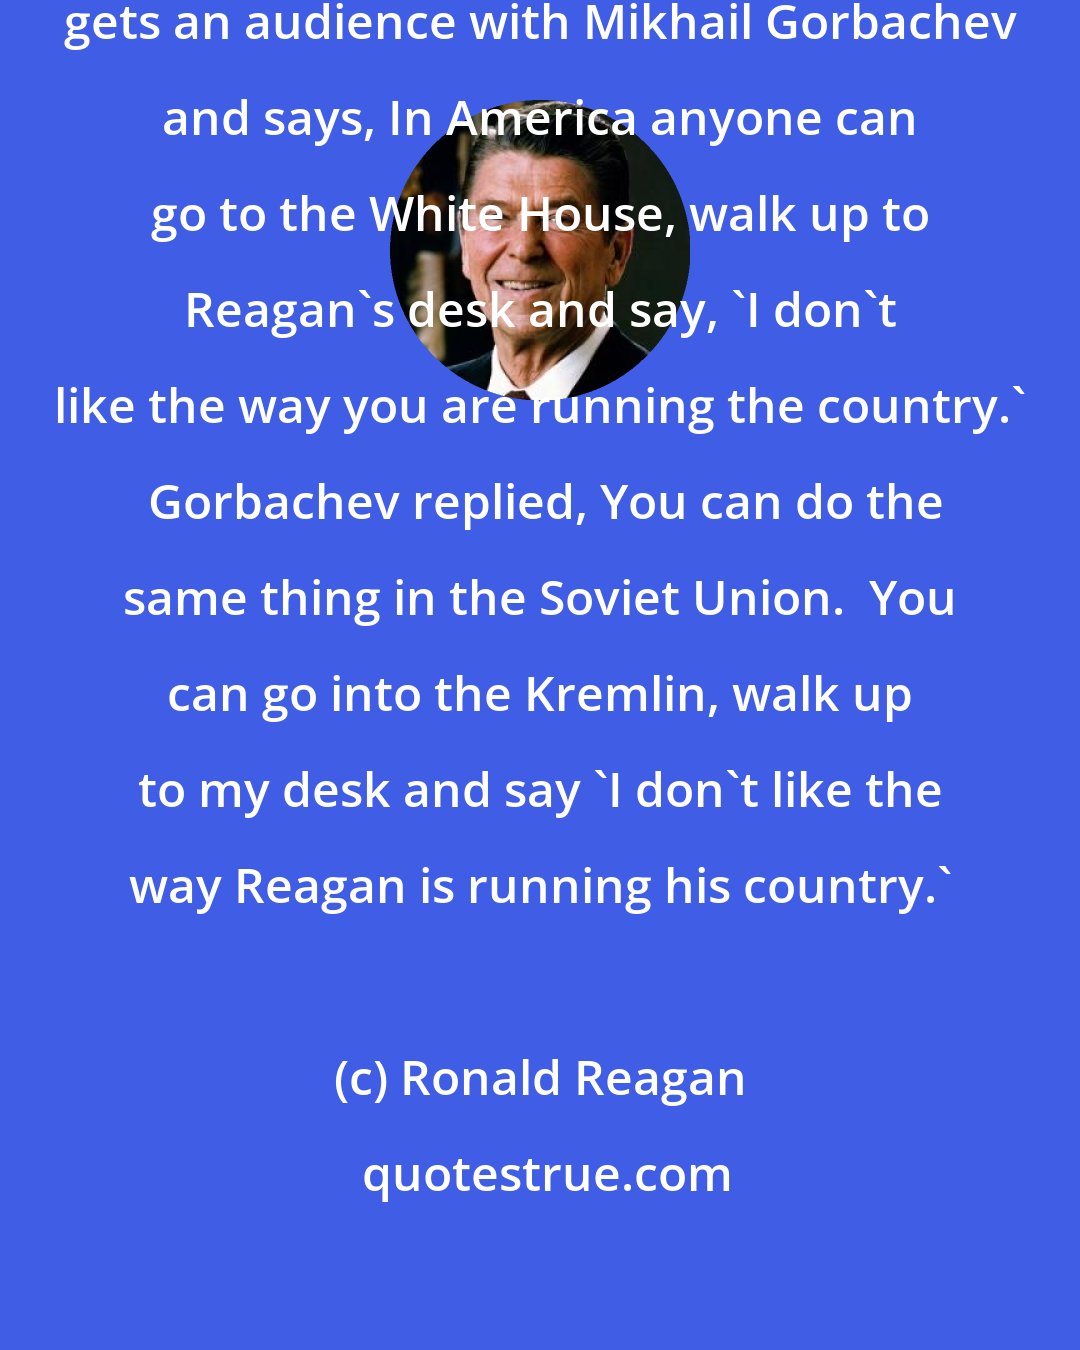 Ronald Reagan: An old Russian woman goes into Kremlin, gets an audience with Mikhail Gorbachev and says, In America anyone can go to the White House, walk up to Reagan's desk and say, 'I don't like the way you are running the country.'  Gorbachev replied, You can do the same thing in the Soviet Union.  You can go into the Kremlin, walk up to my desk and say 'I don't like the way Reagan is running his country.'